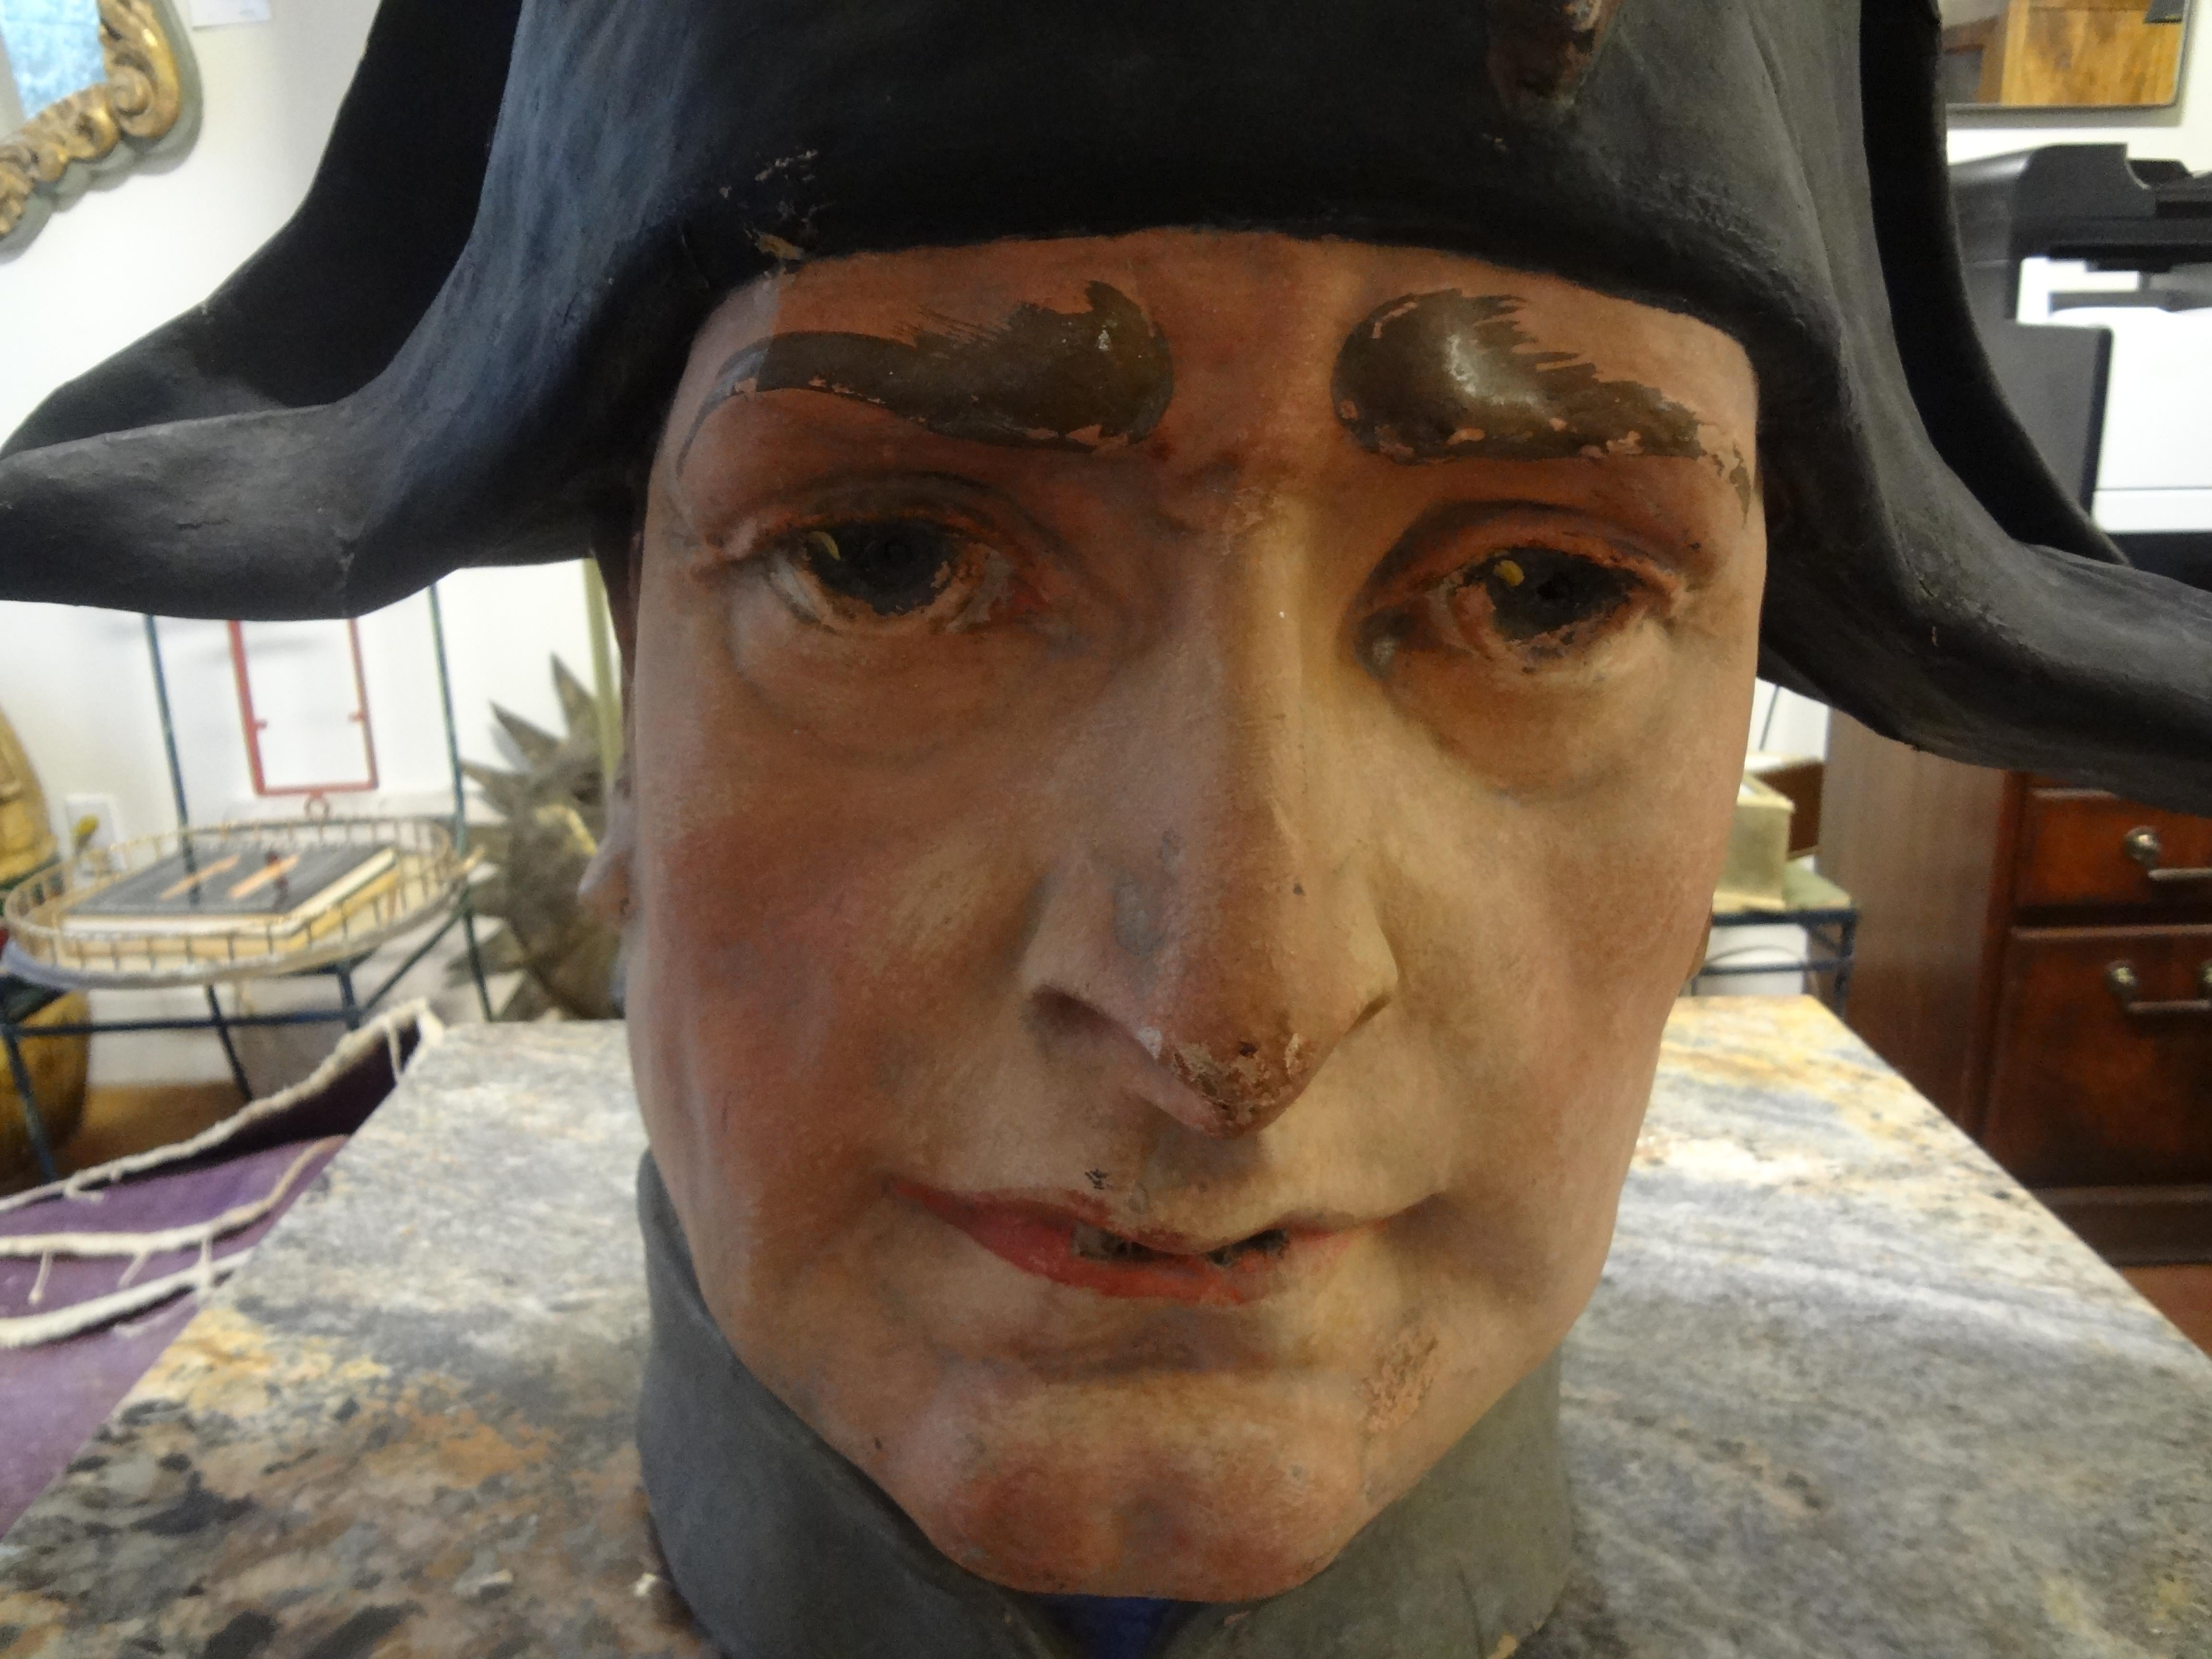 French Papier Mâché Bust of Napoleon Bonaparte.
Stunning large realistic French papier mâché or papier mâché bust of Napoleon Bonaparte. This beautiful, colorful handmade neoclassical style or Empire style sculpture is one of a kind and was executed